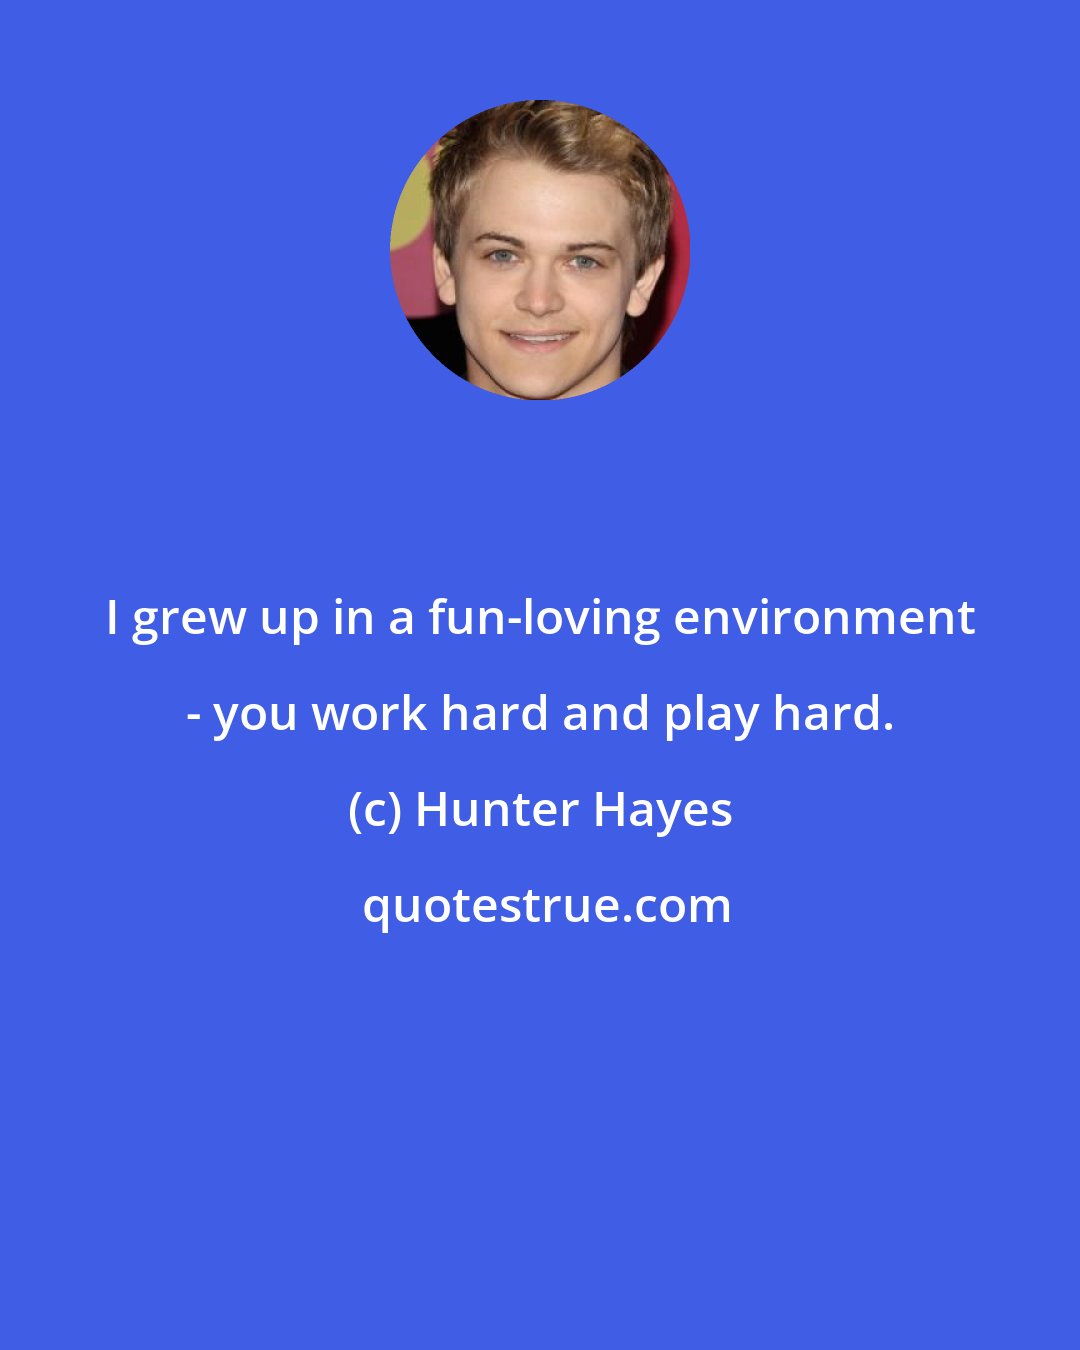 Hunter Hayes: I grew up in a fun-loving environment - you work hard and play hard.